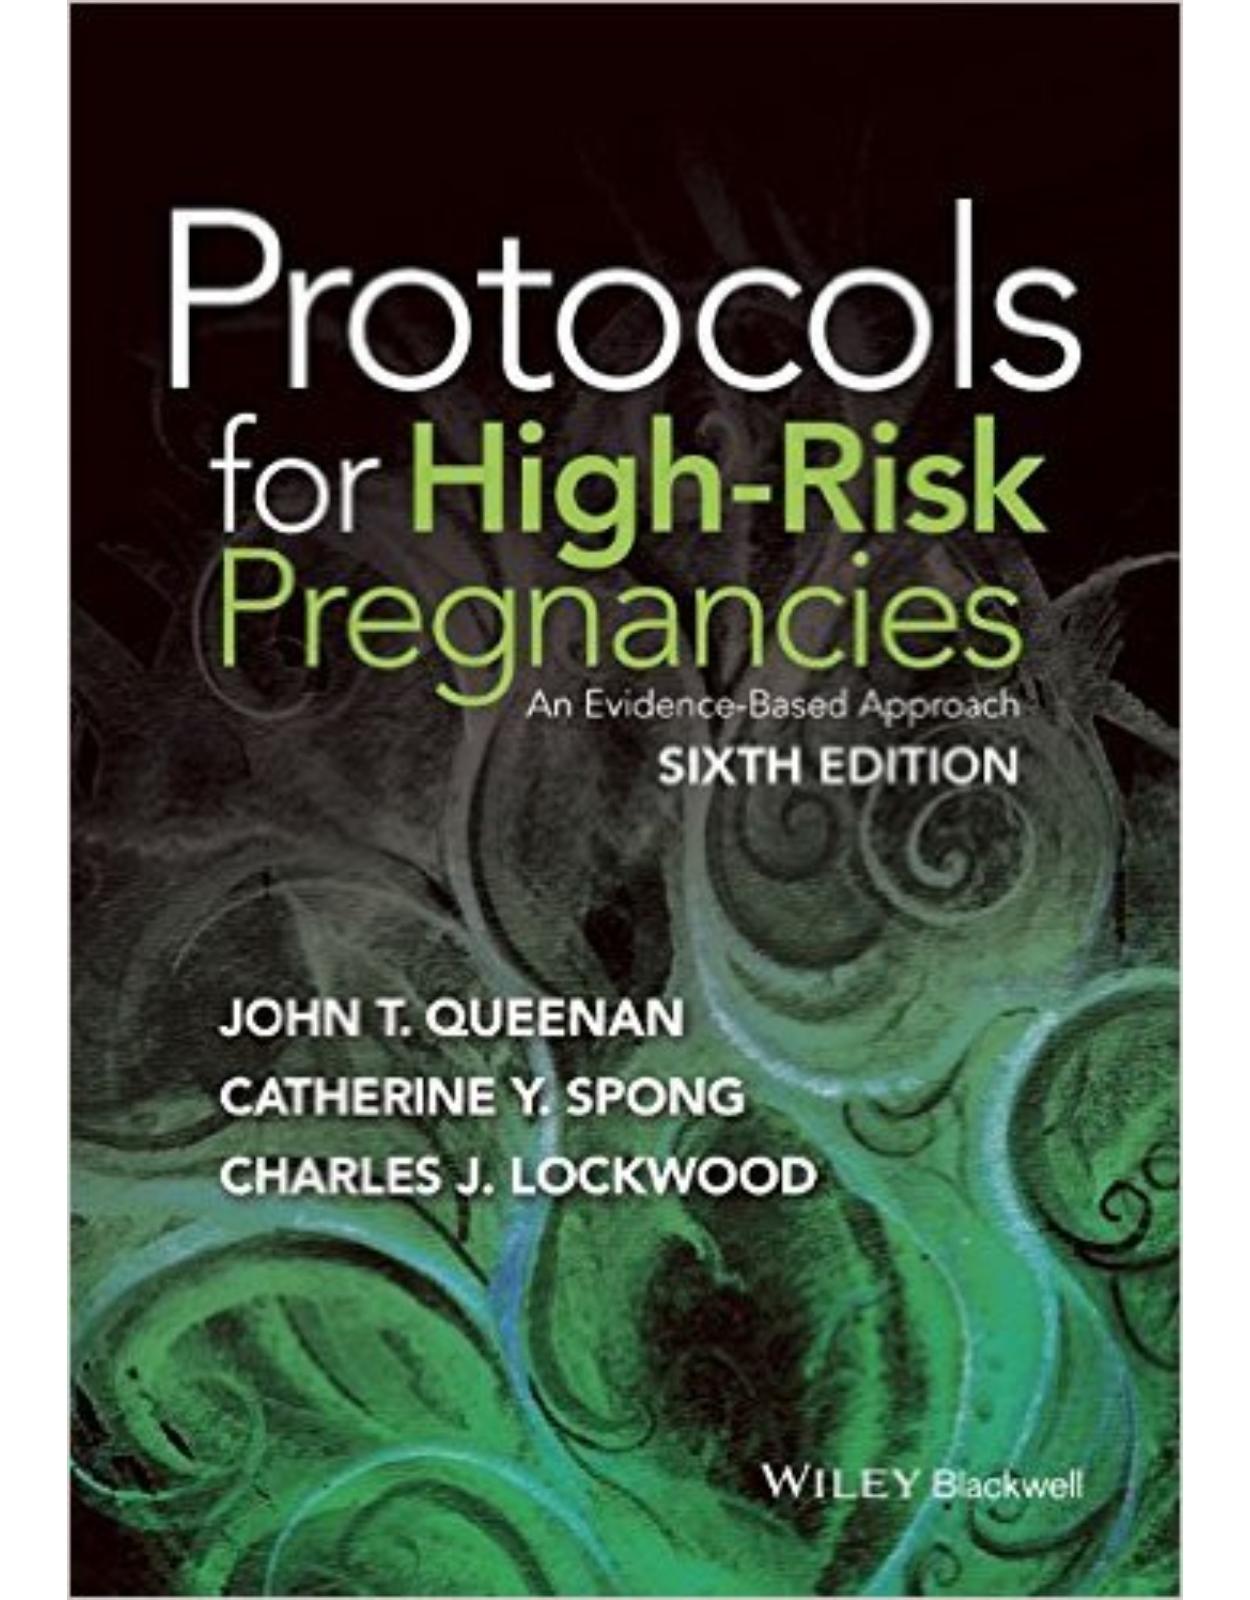 Protocols for High-Risk Pregnancies: An Evidence-Based Approach 6th Edition